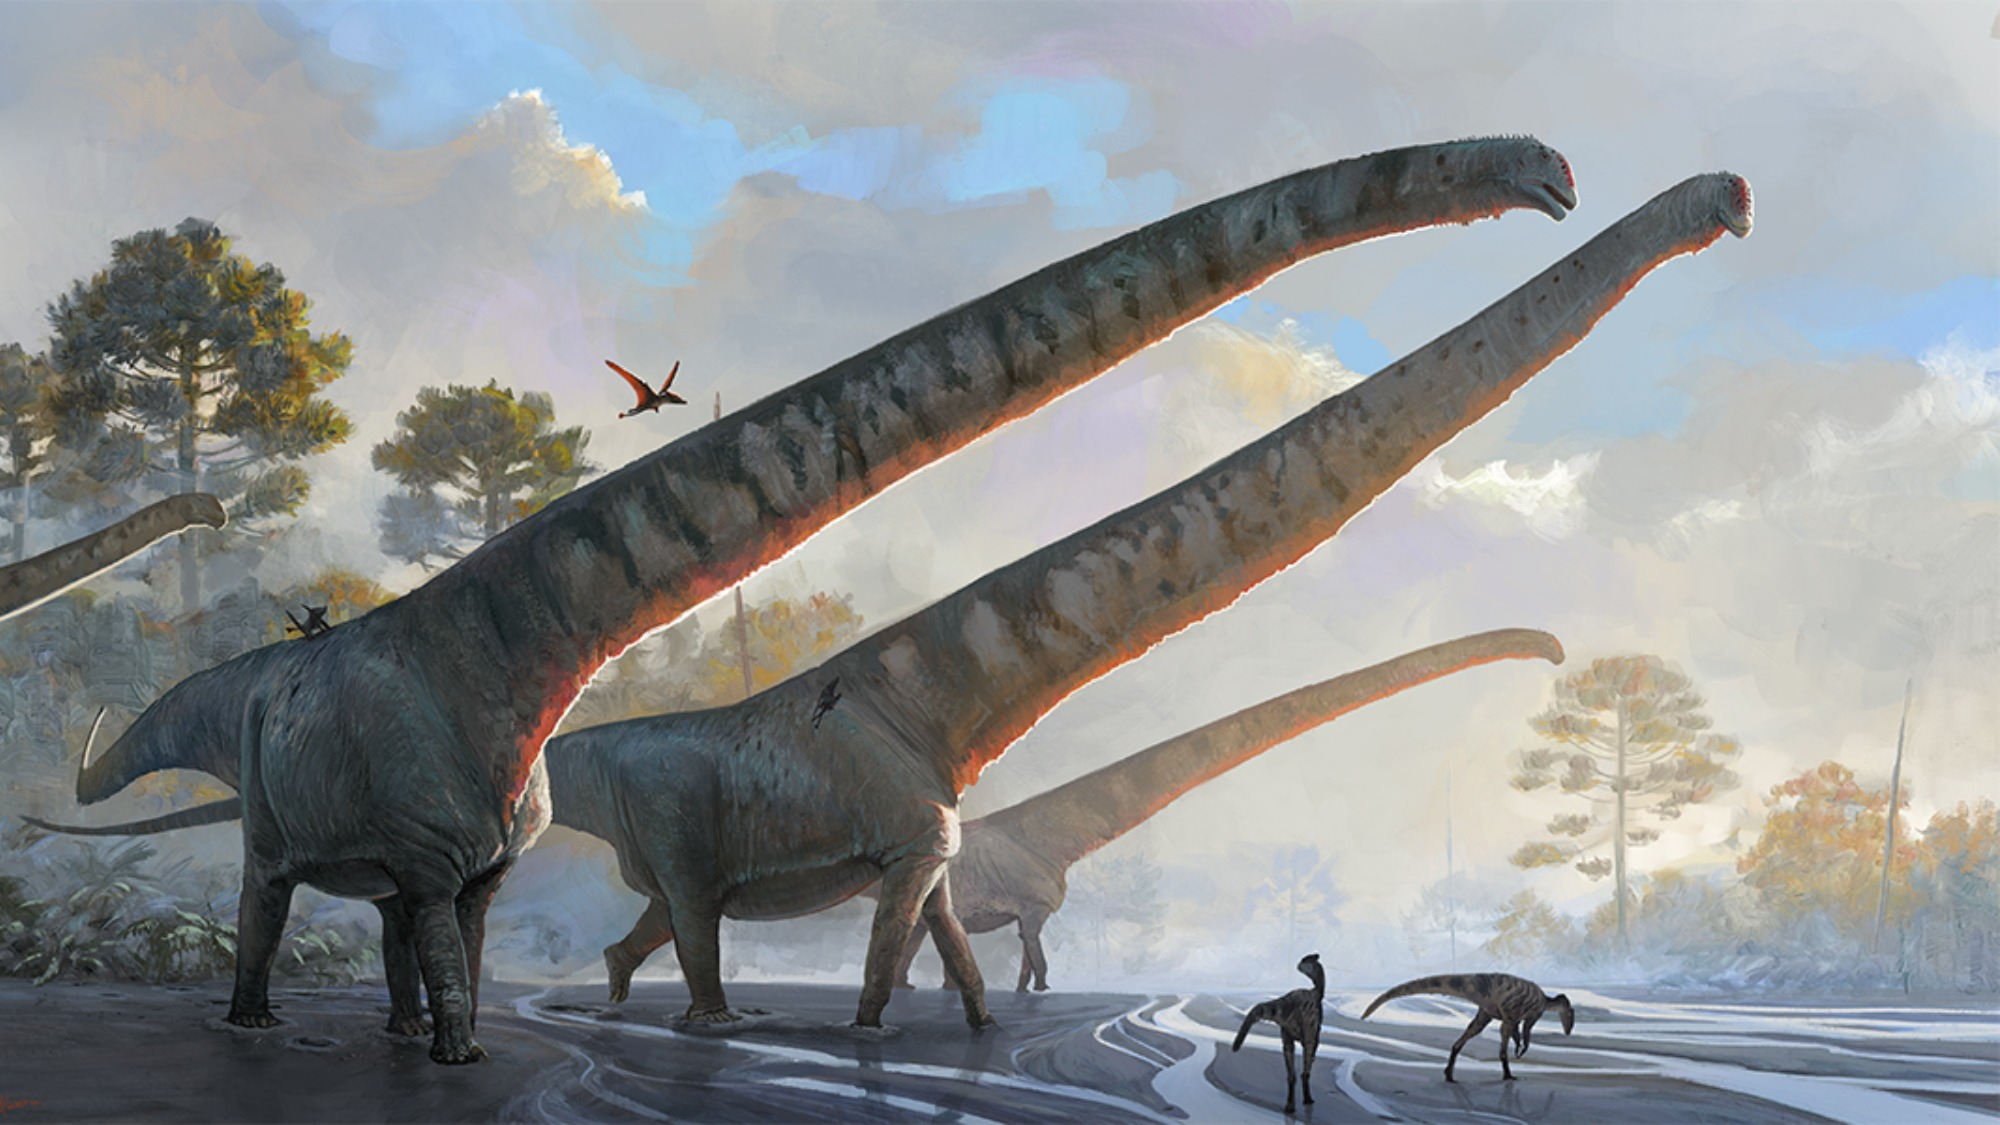 This dinosaur’s record-breaking neck defies the laws of nature